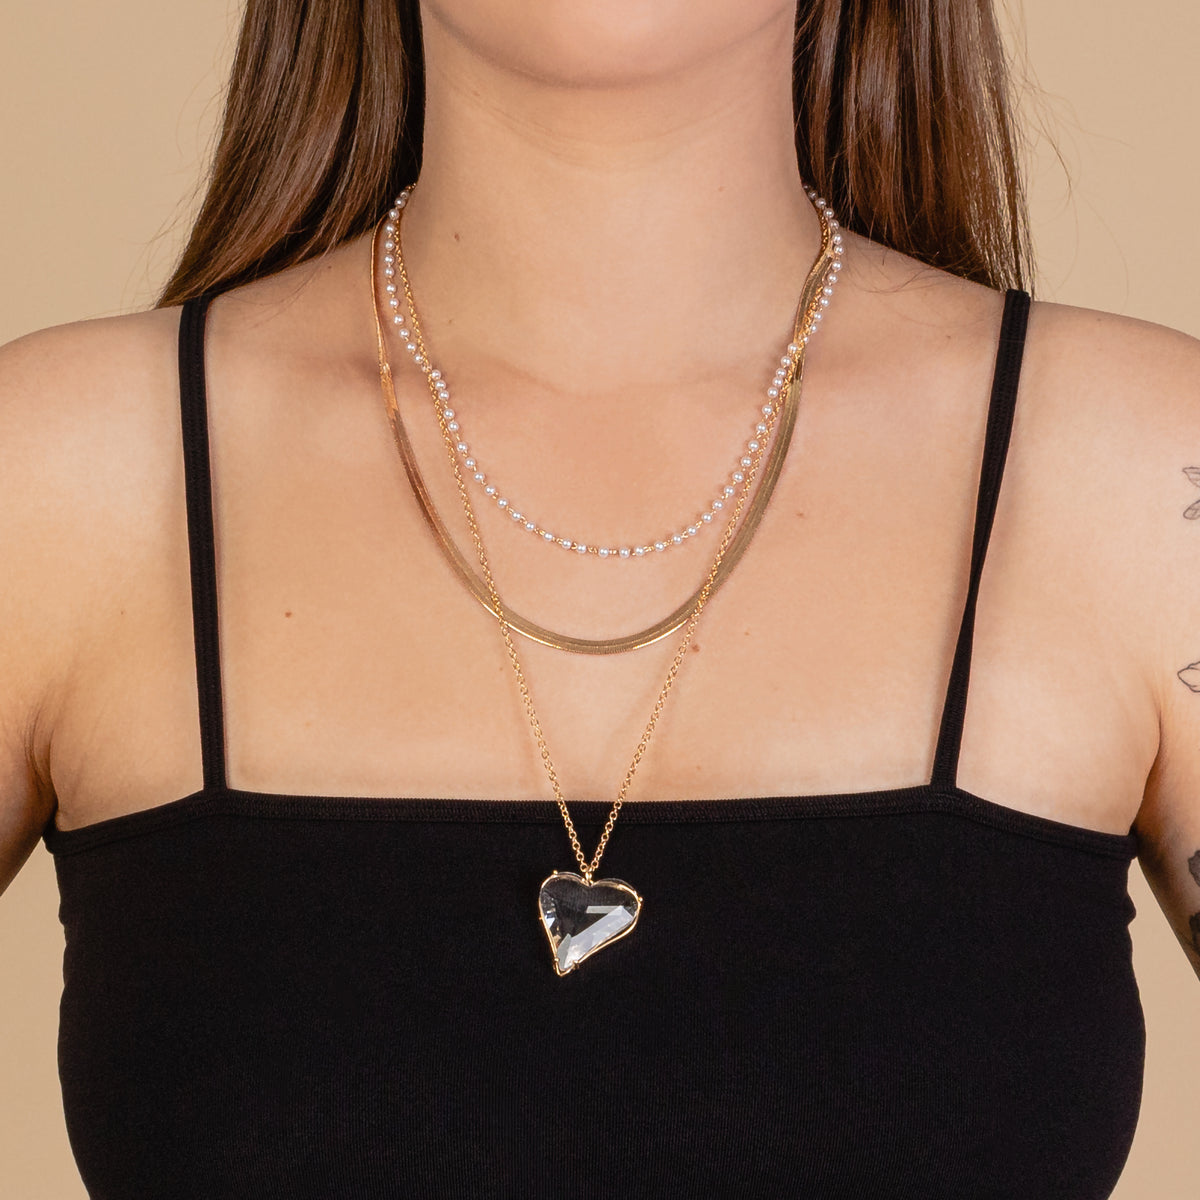 72951 - Layered Heart Necklace - White